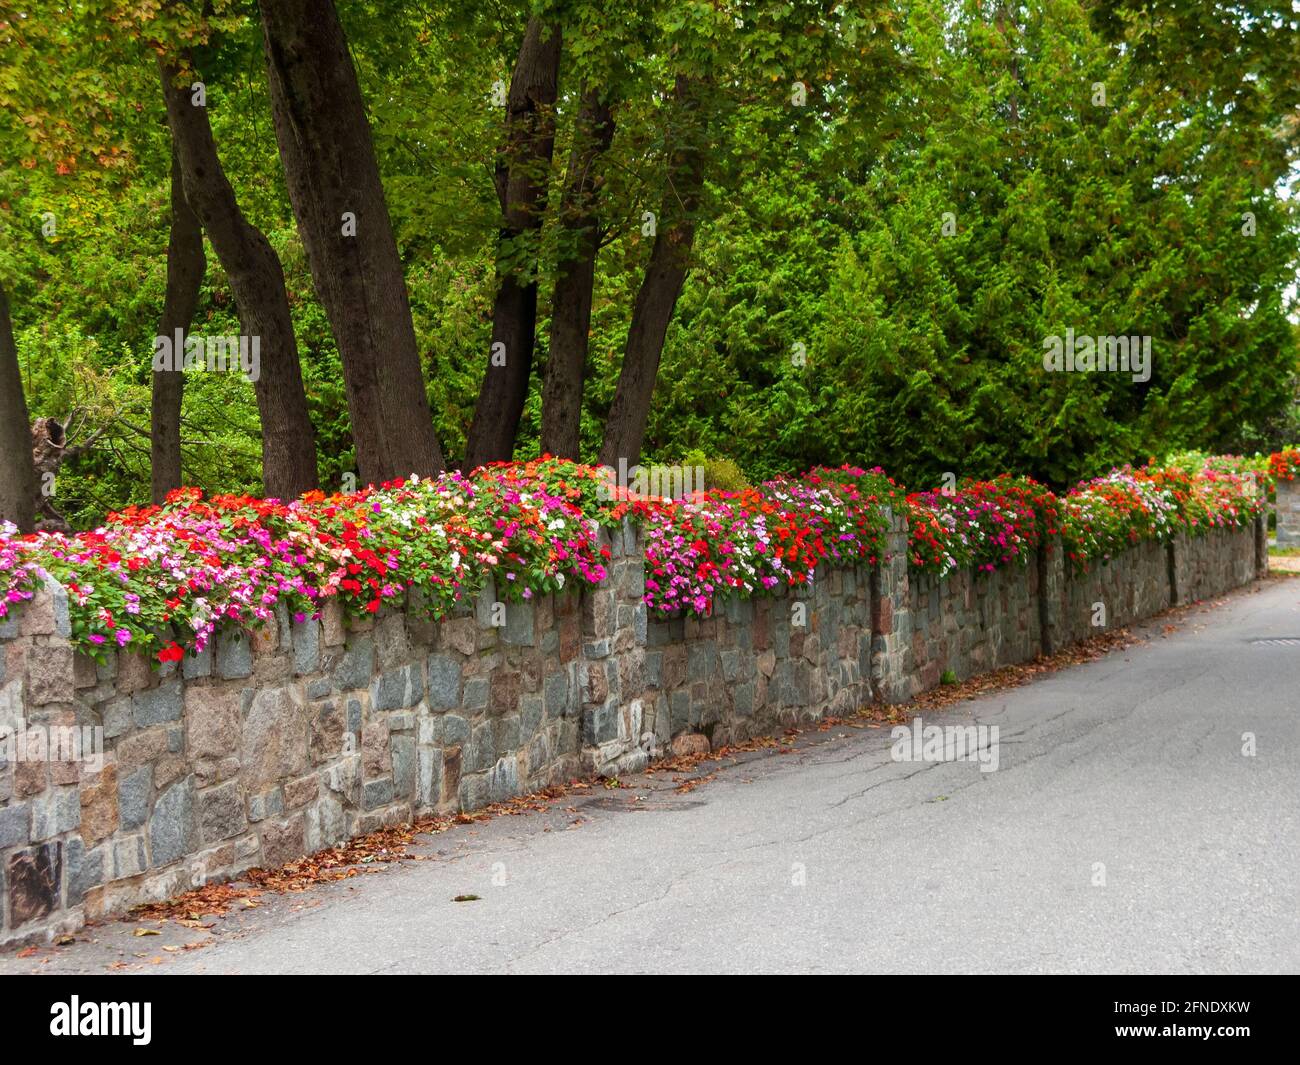 Impatiens walleriana spill over a stone wall alongside a road in Bar Harbor, Maine, USA. Stock Photo